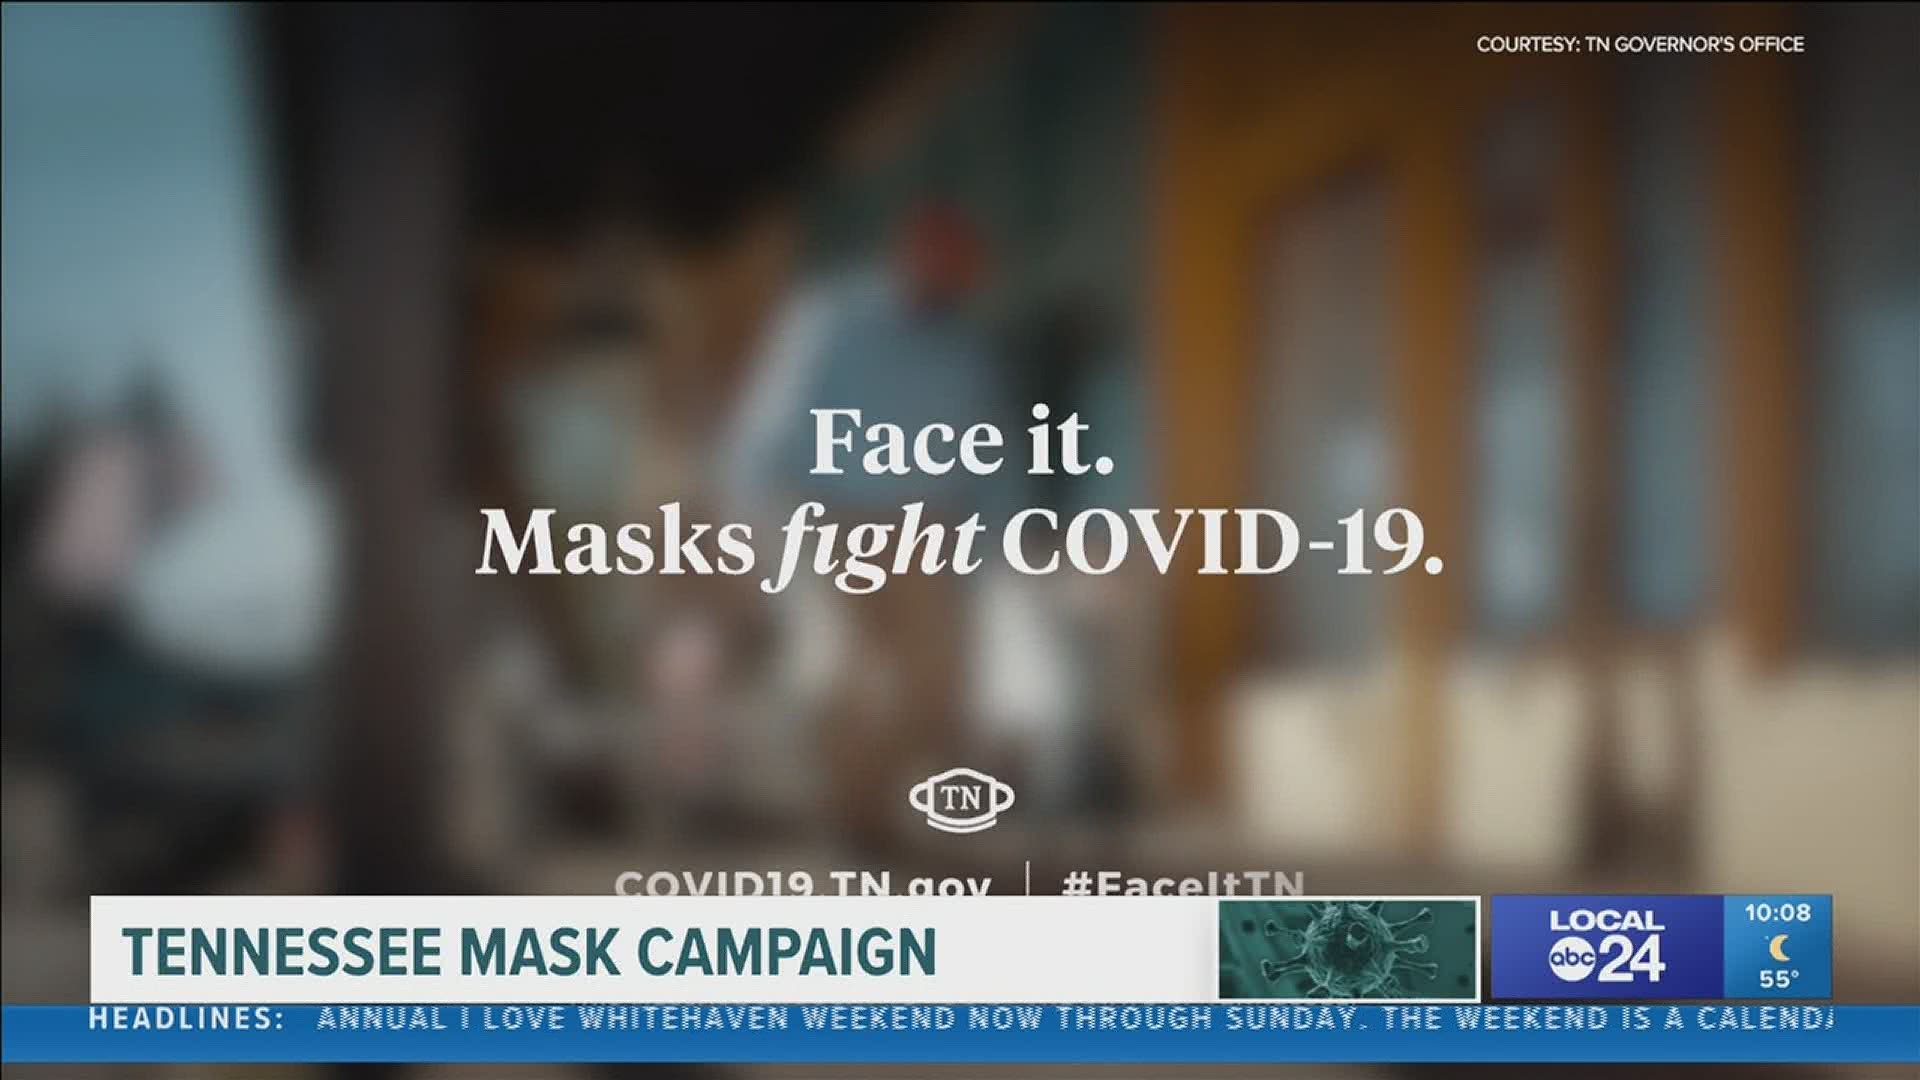 The latest addition to the "Face It, Masks Fight COVID-19" campaign is out.